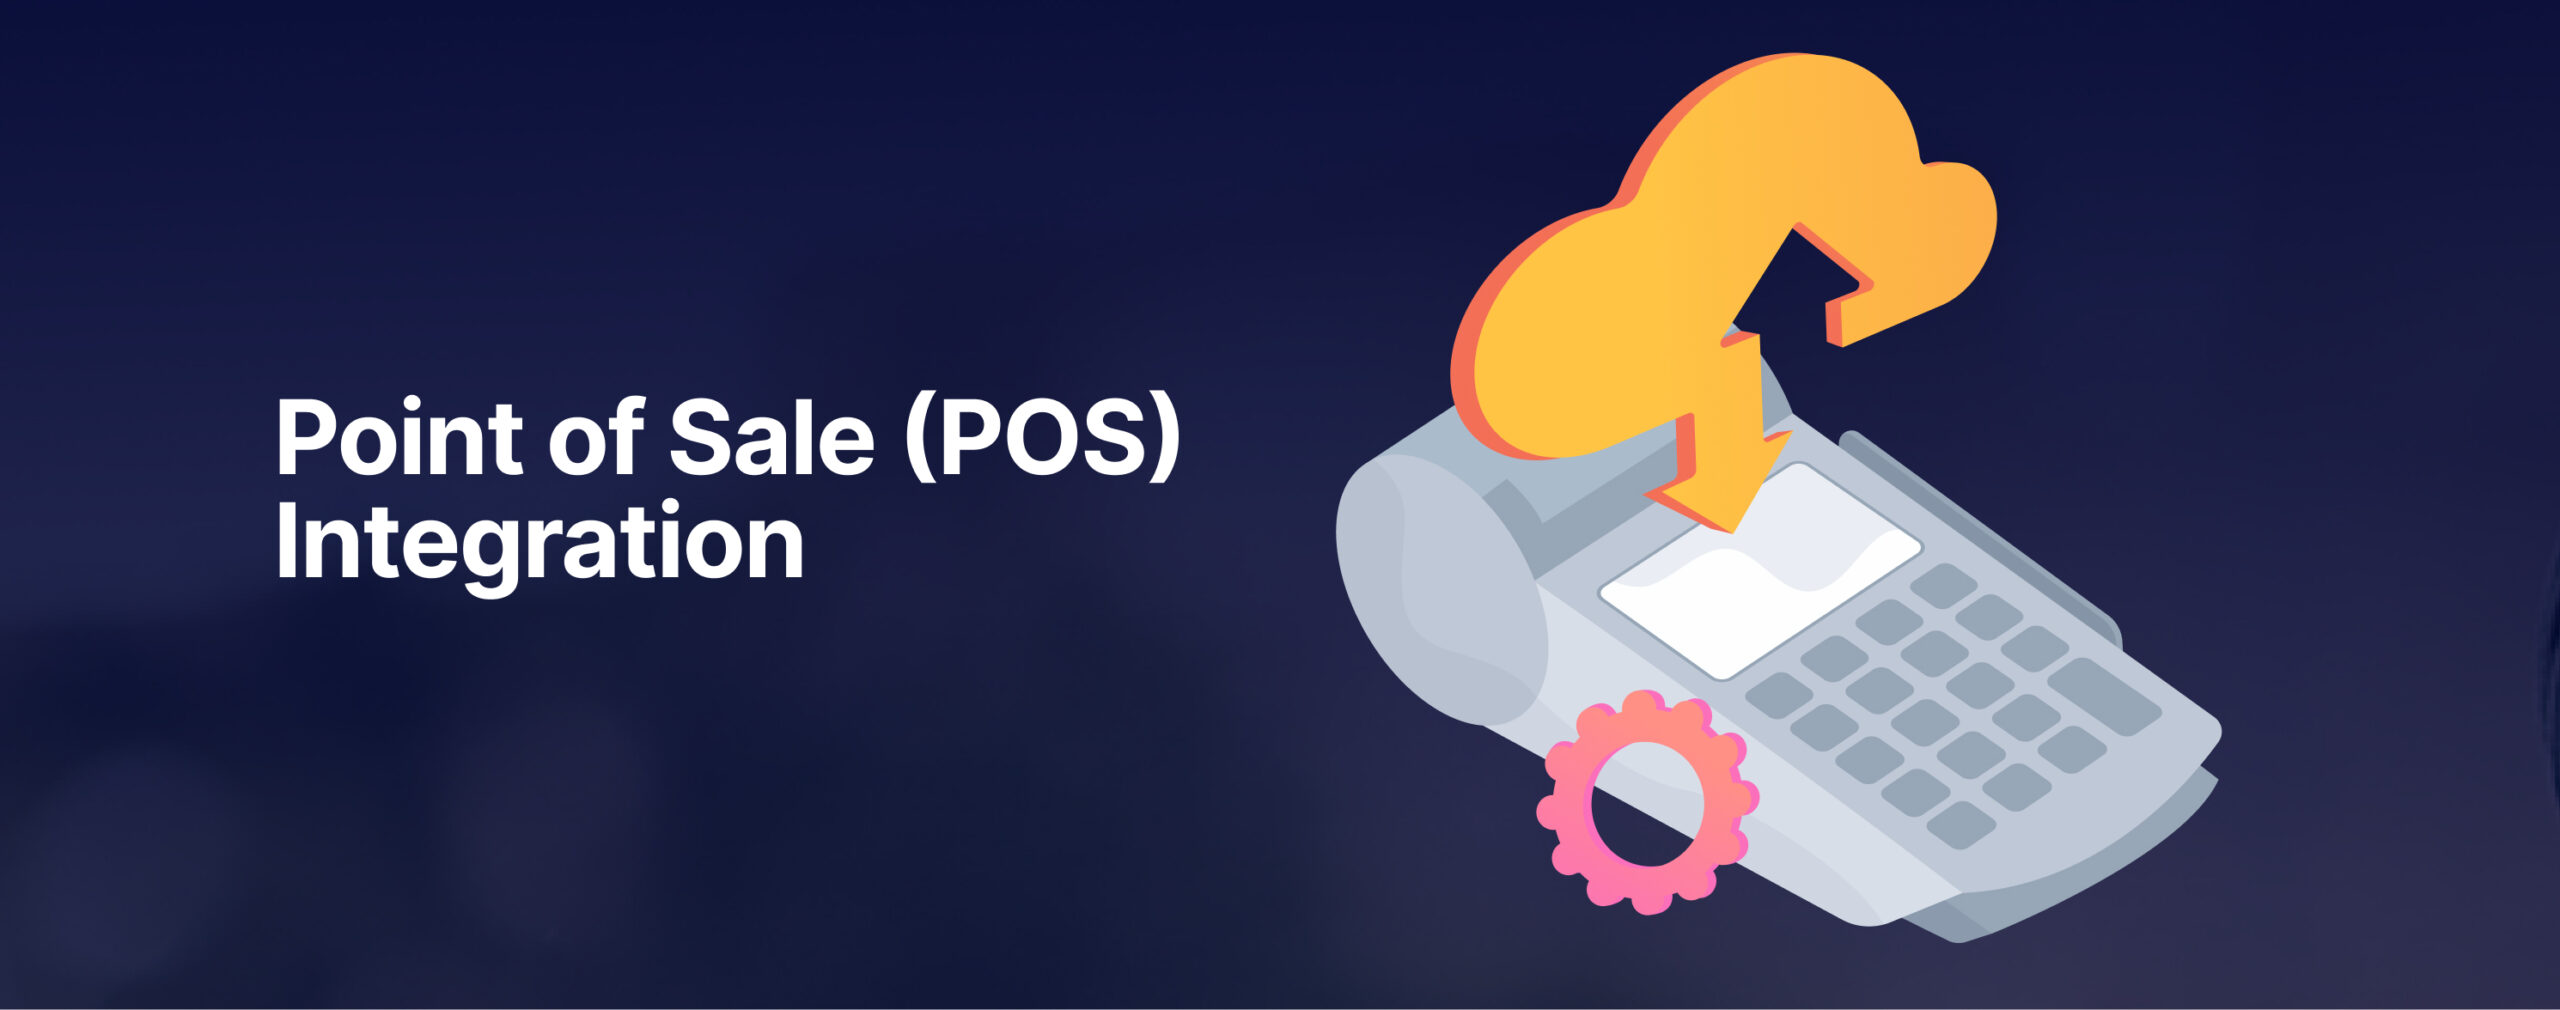 Point-of-Sale-POS-Integration